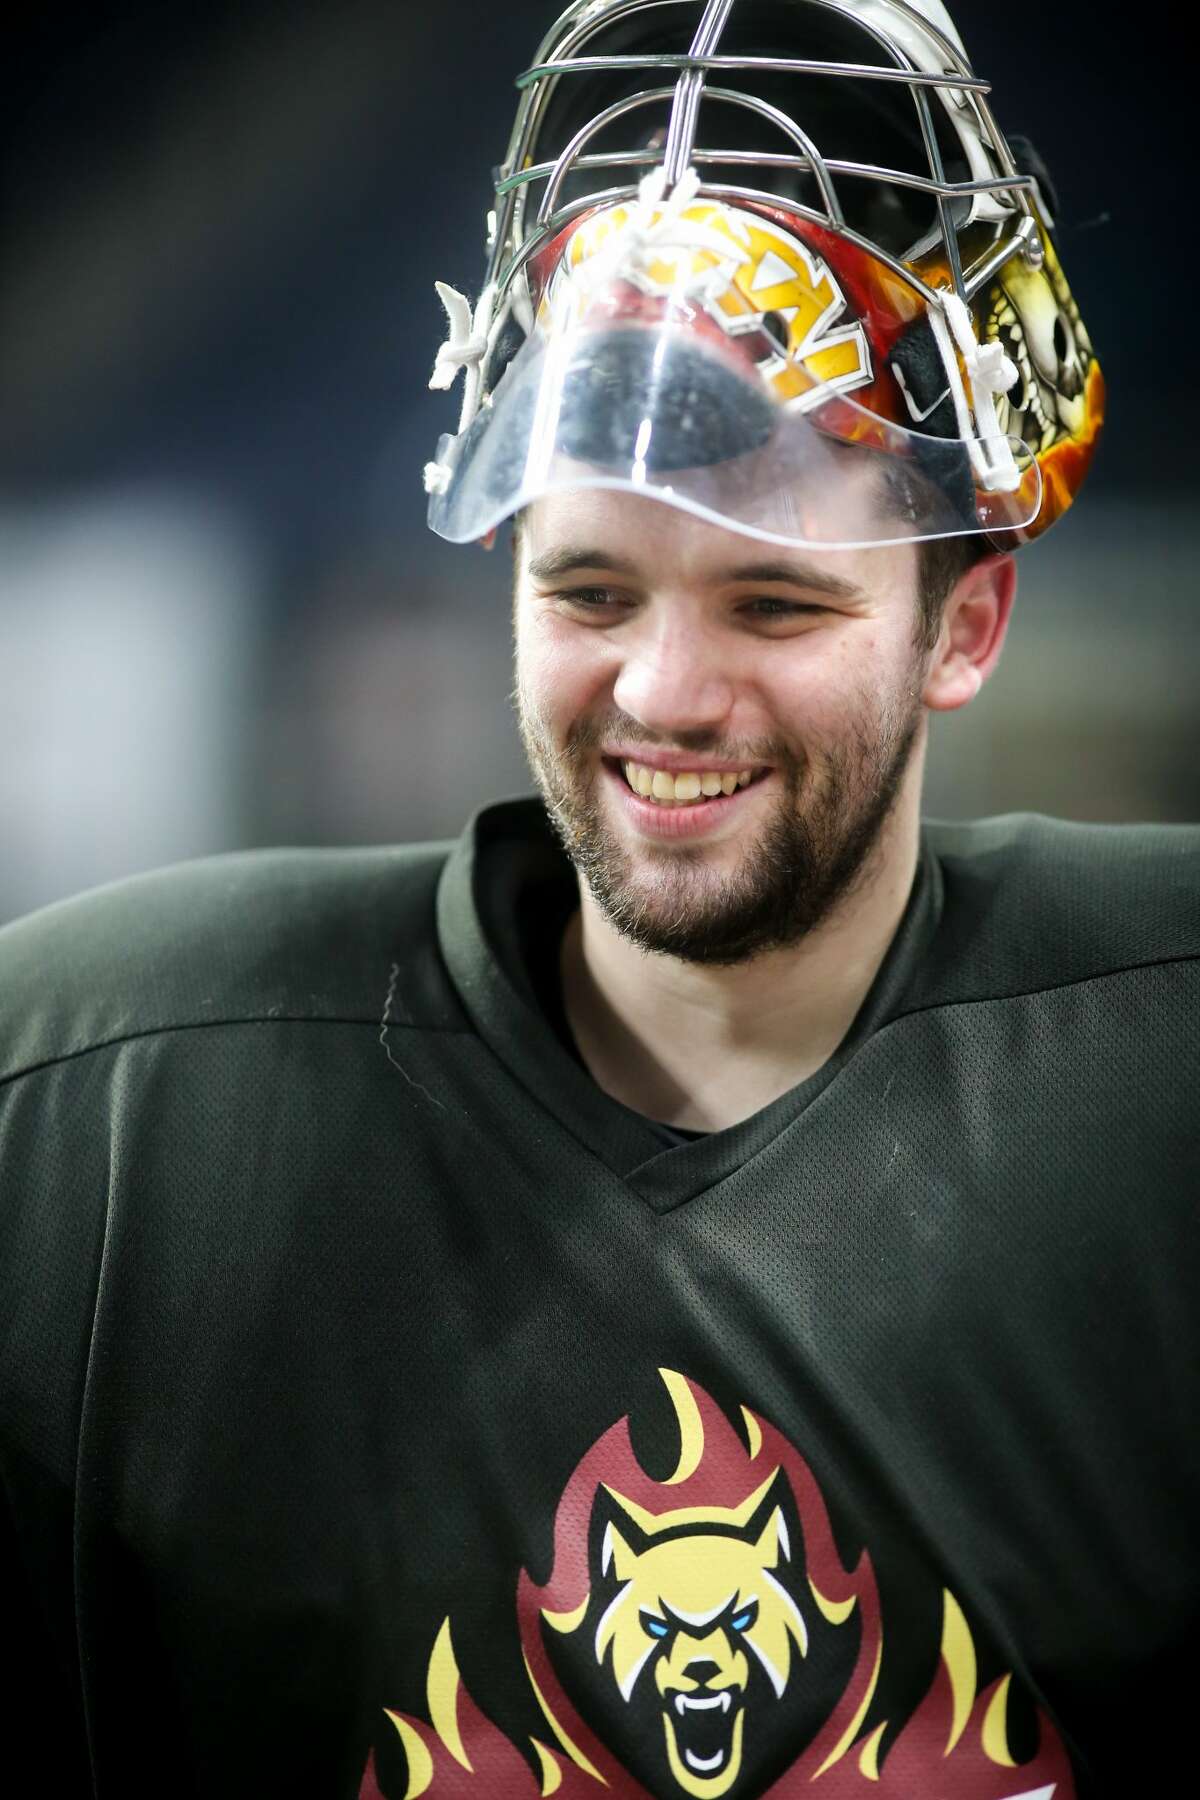 Albany FireWolves goalkeeper Ethan Woods said Saturday night's fight against the Rochester Knighthawks was his second as a lacrosse player. (Albany FireWolves)